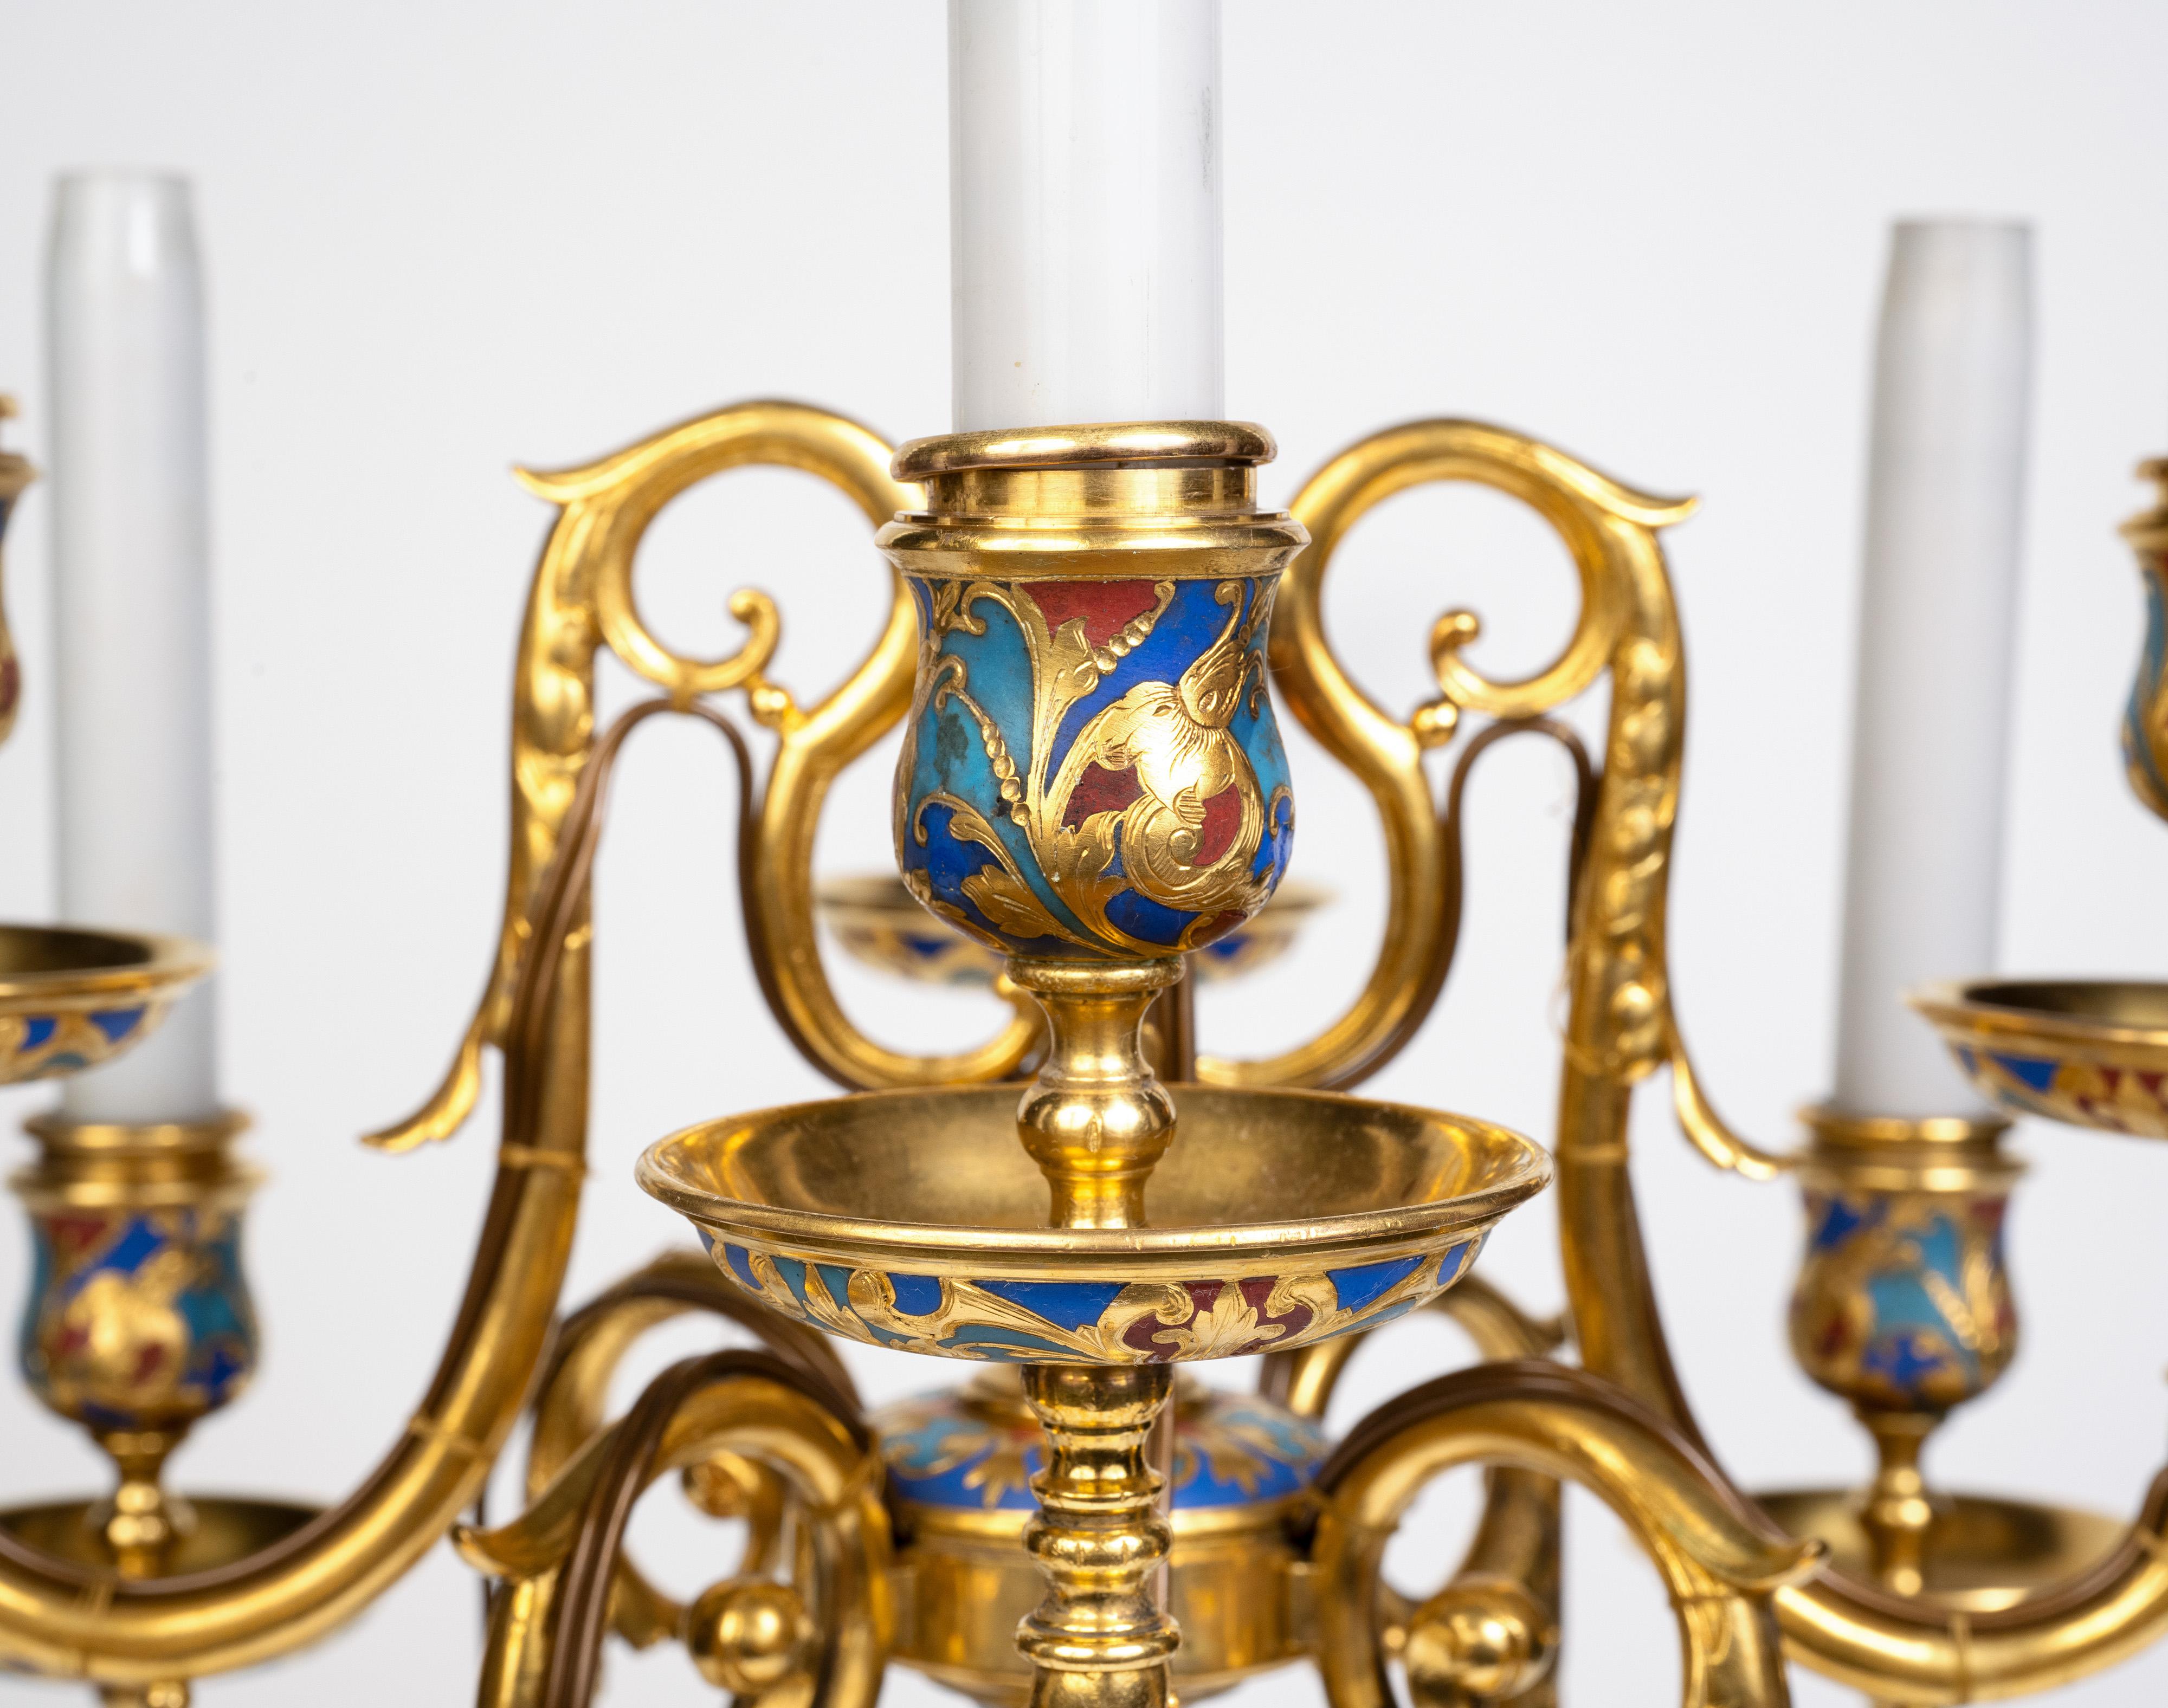 An Exceptional Pair of Champleve Enamel Ormolu Candelabra by Sevin & Barbedienne For Sale 1